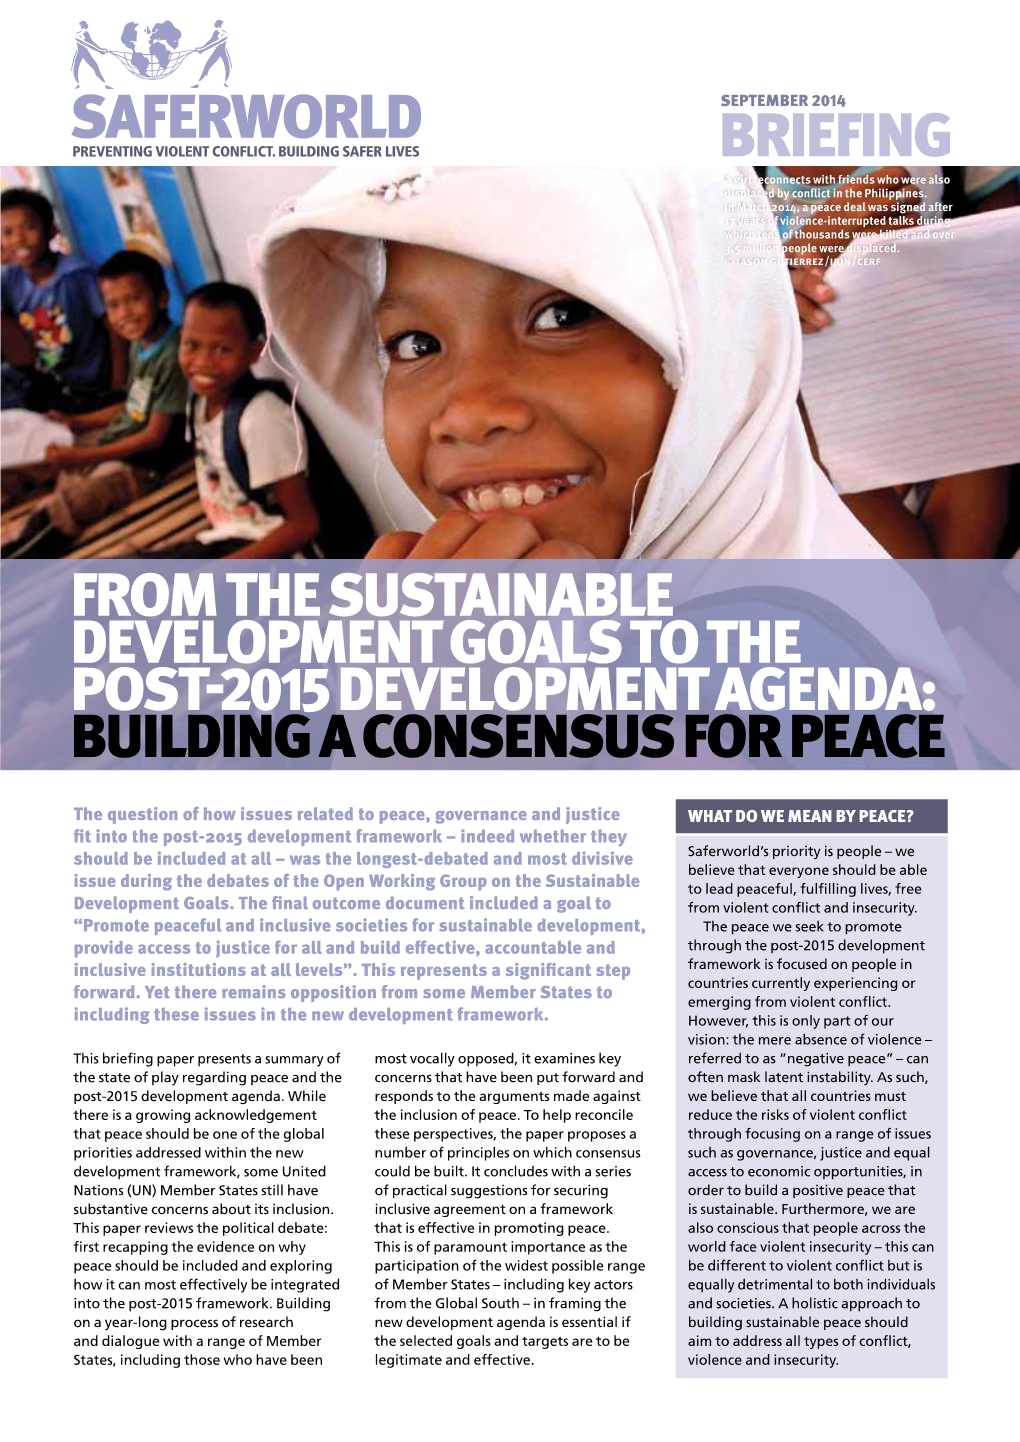 Building a Consensus for Peace PROCESSES 2012 20133 | Saferworld Briefing Building2014 a Consensus for Peace 2015